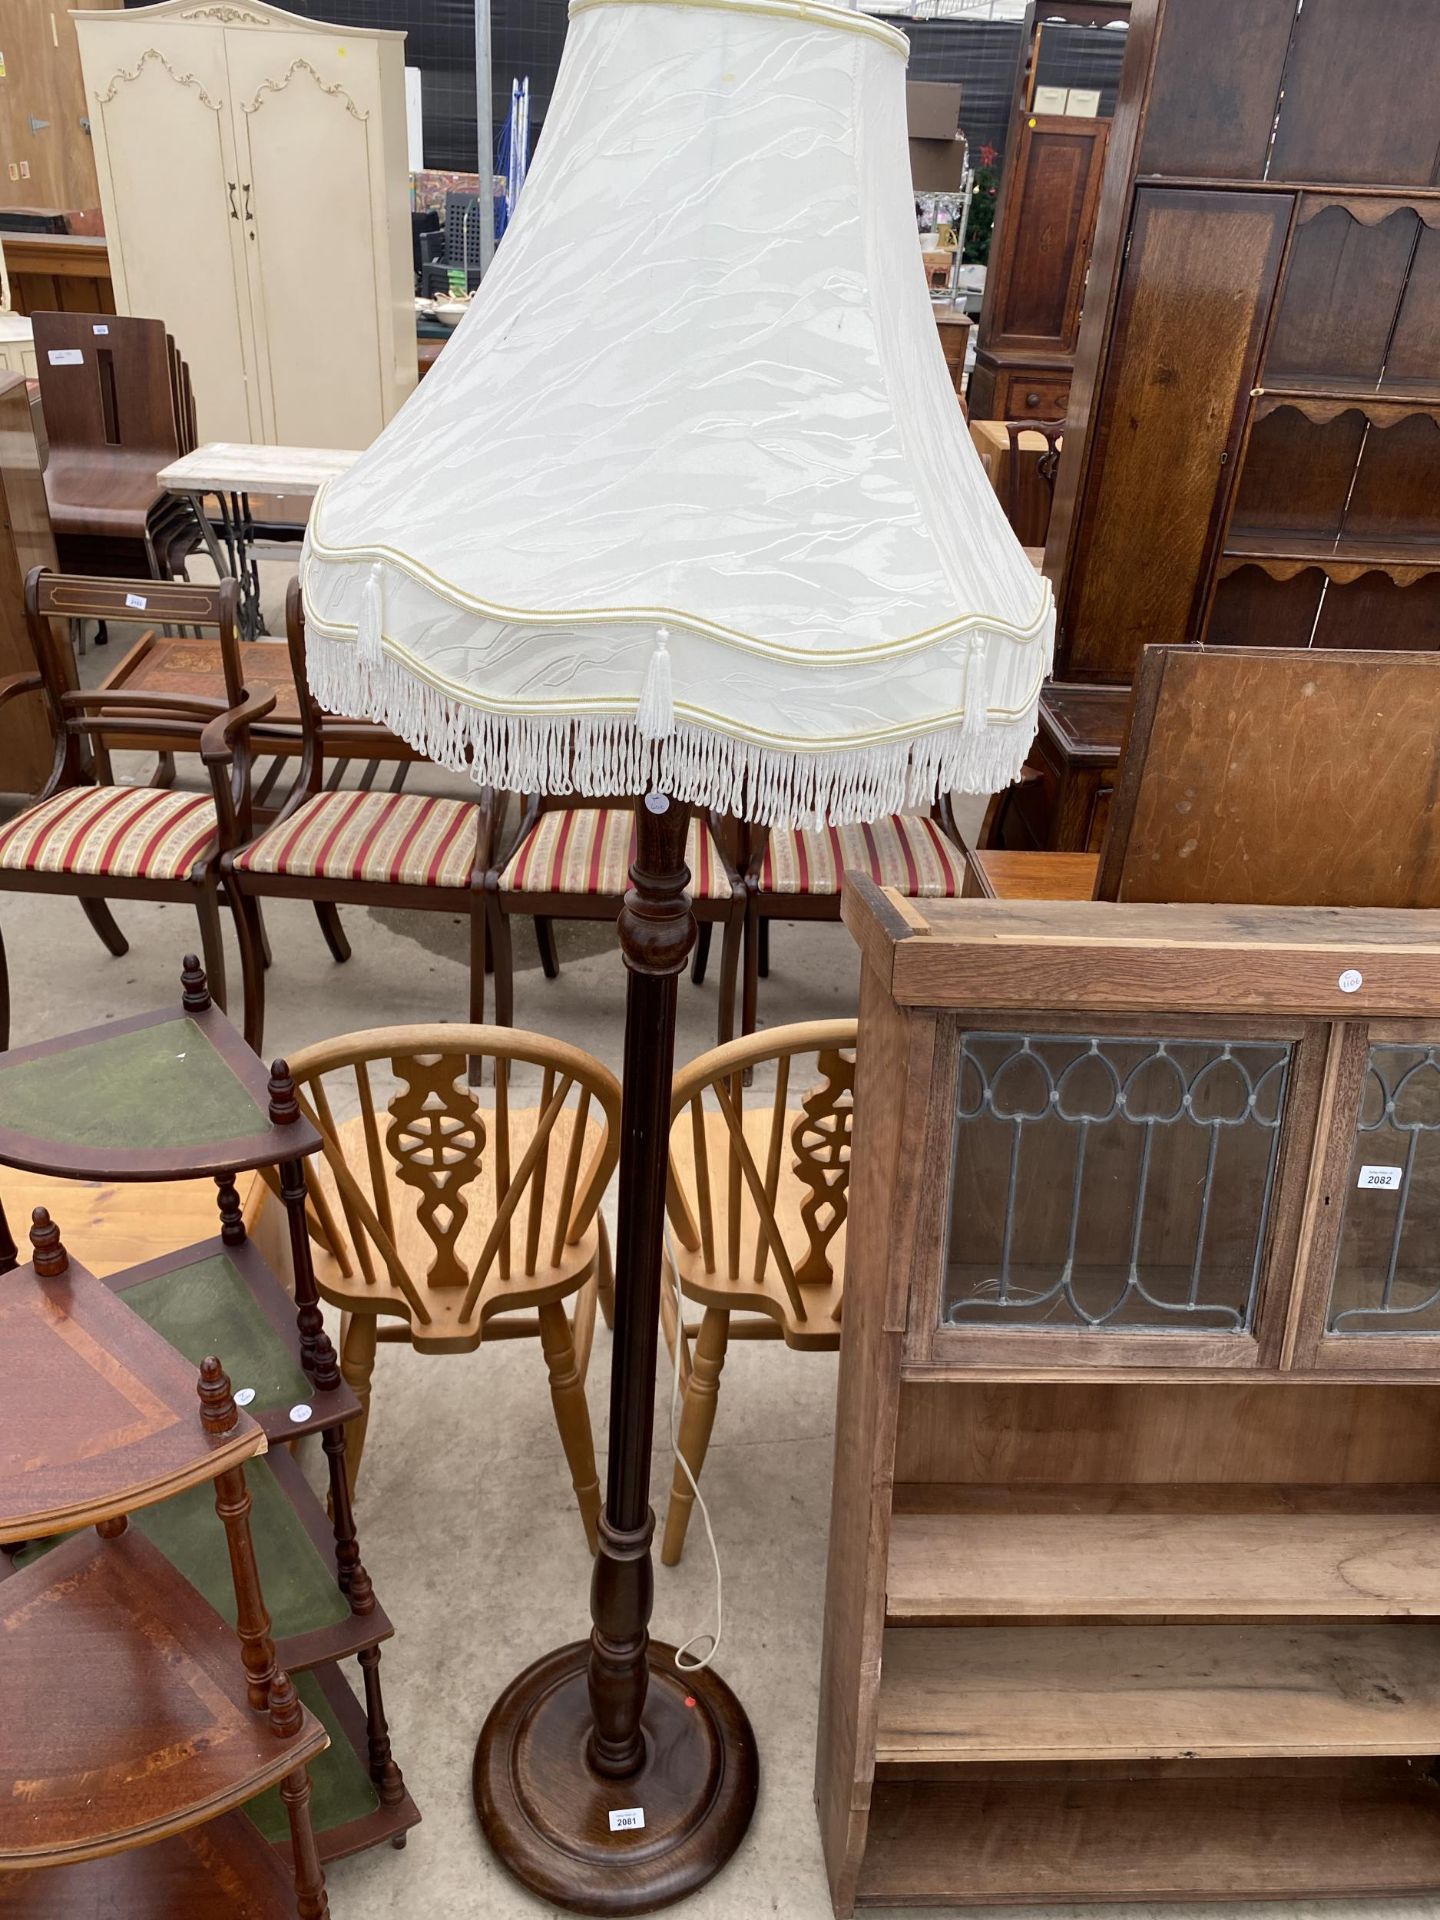 AN EARLY 20TH CENTURY OAK STANDARD LAMP WITH SHADE